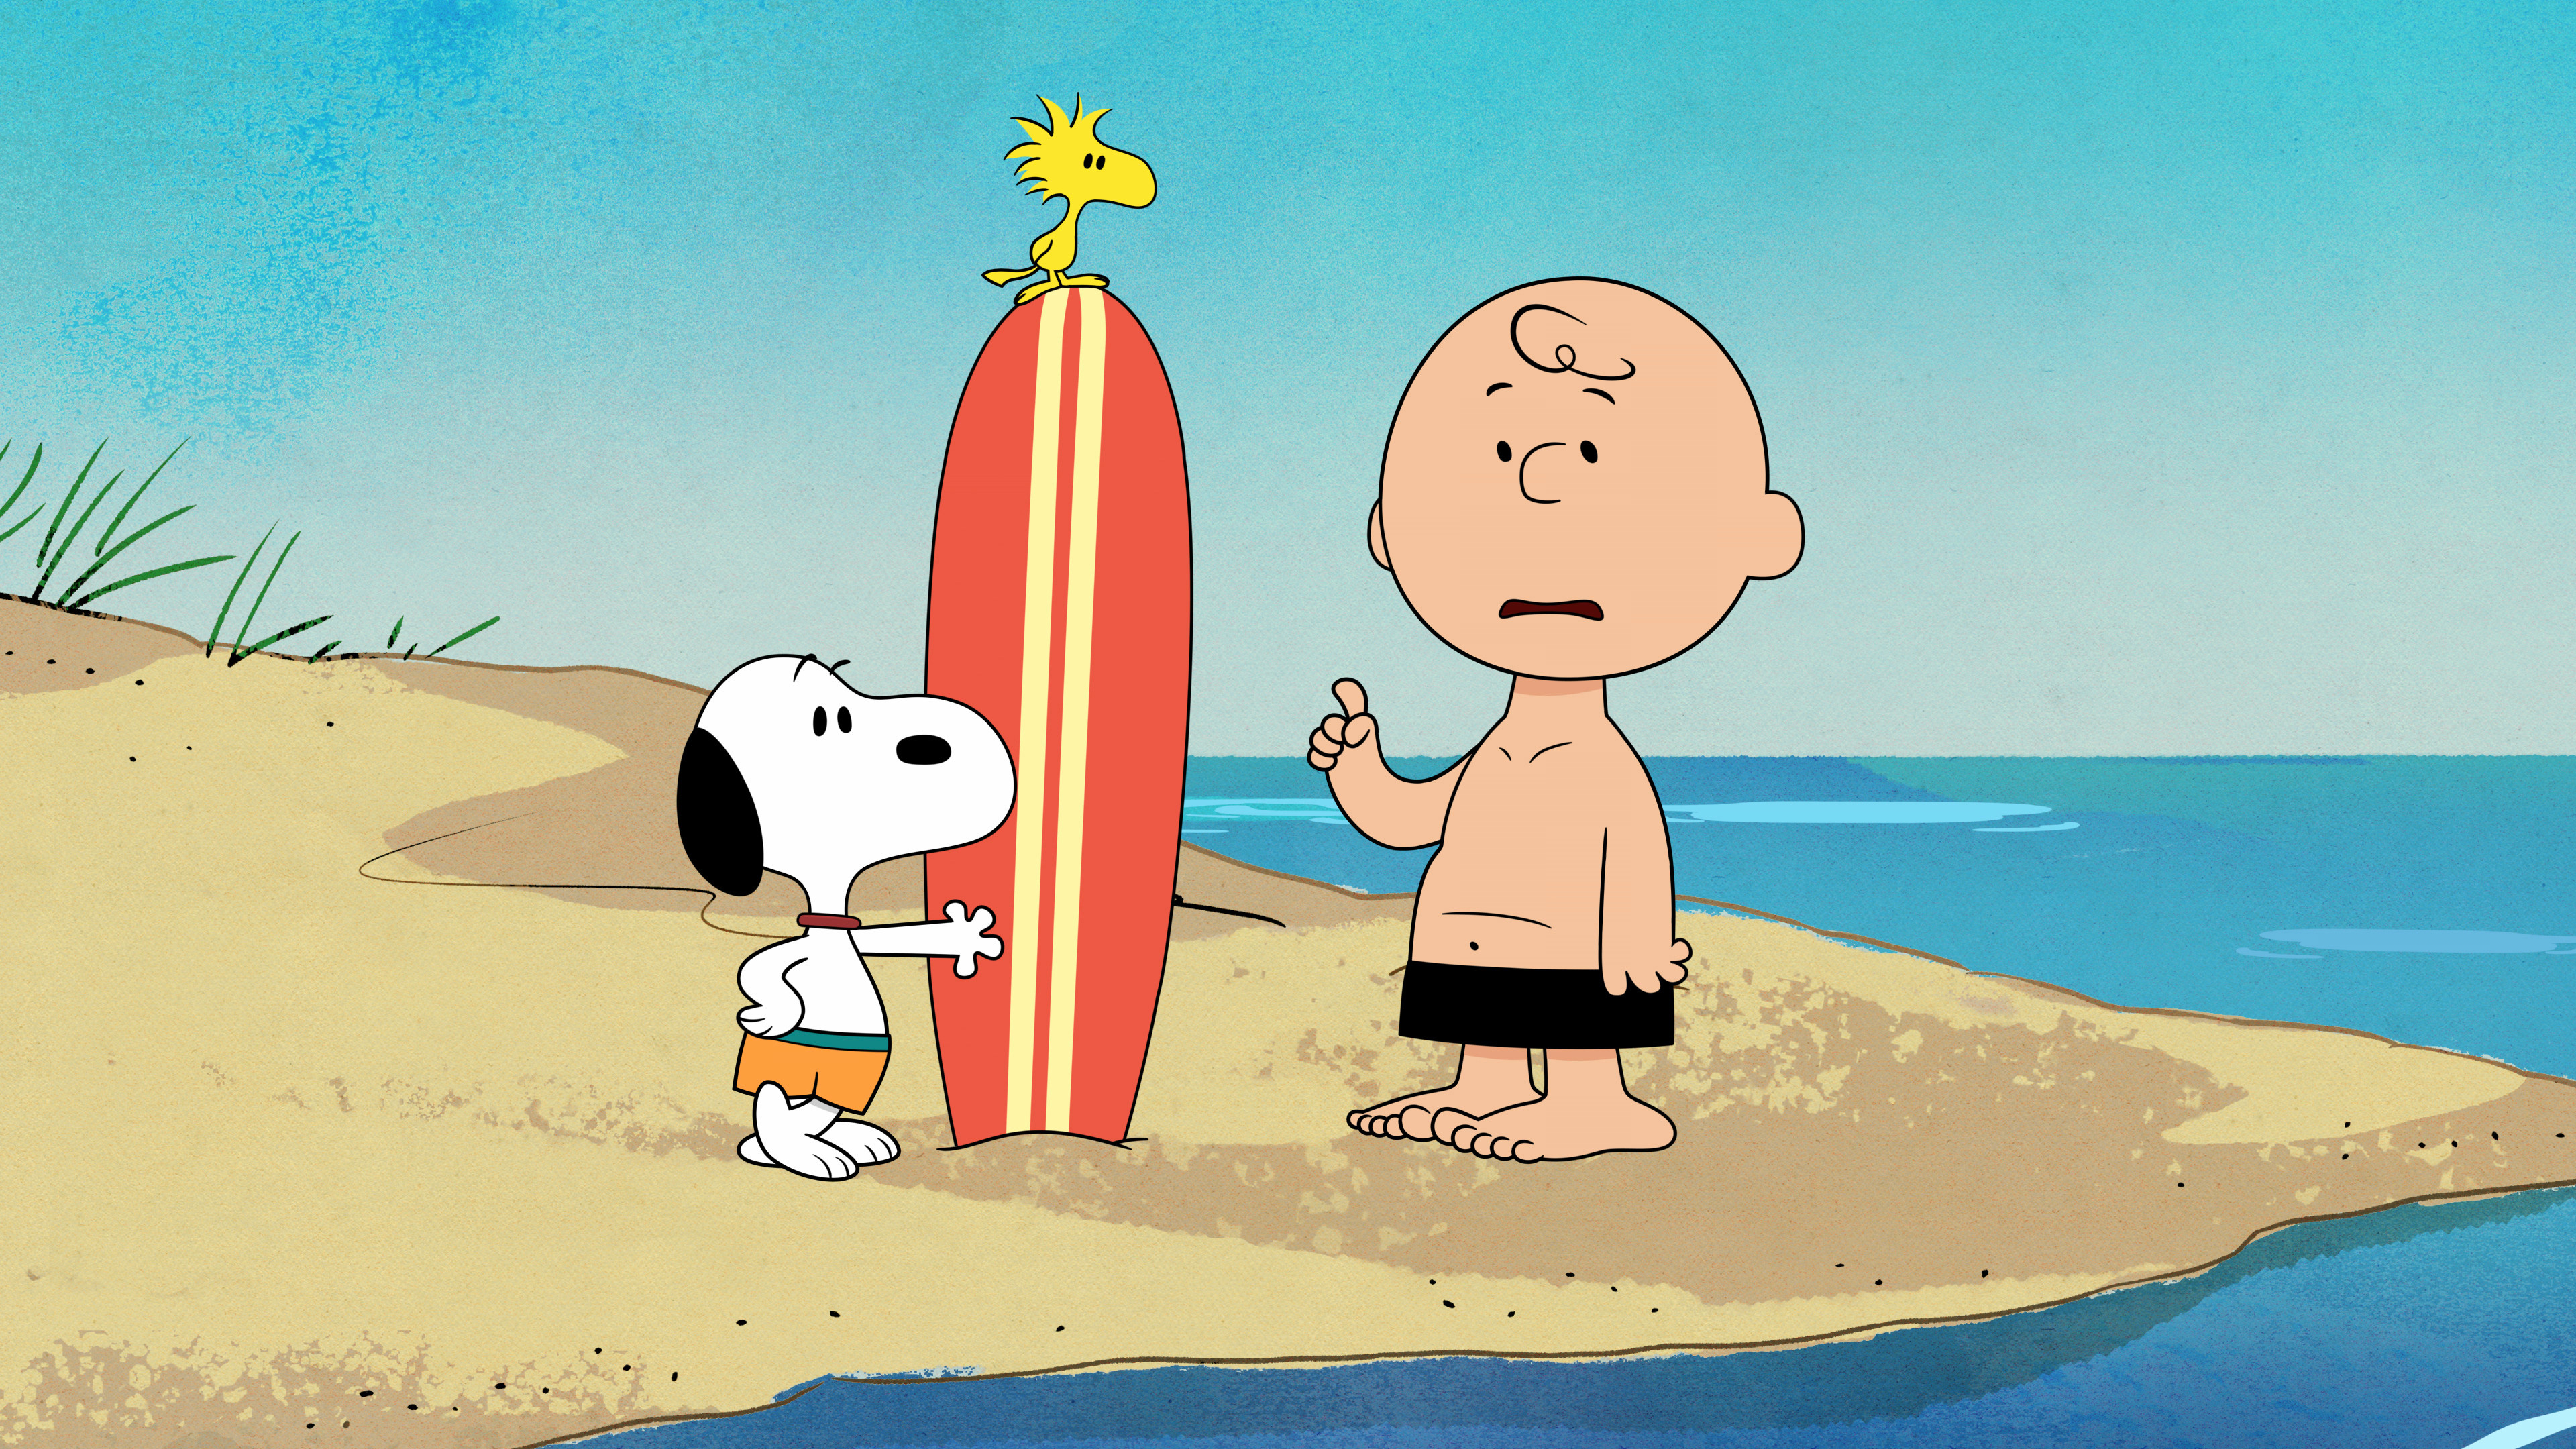 3840x2160 30+ The Snoopy Show HD Wallpapers and Backgrounds